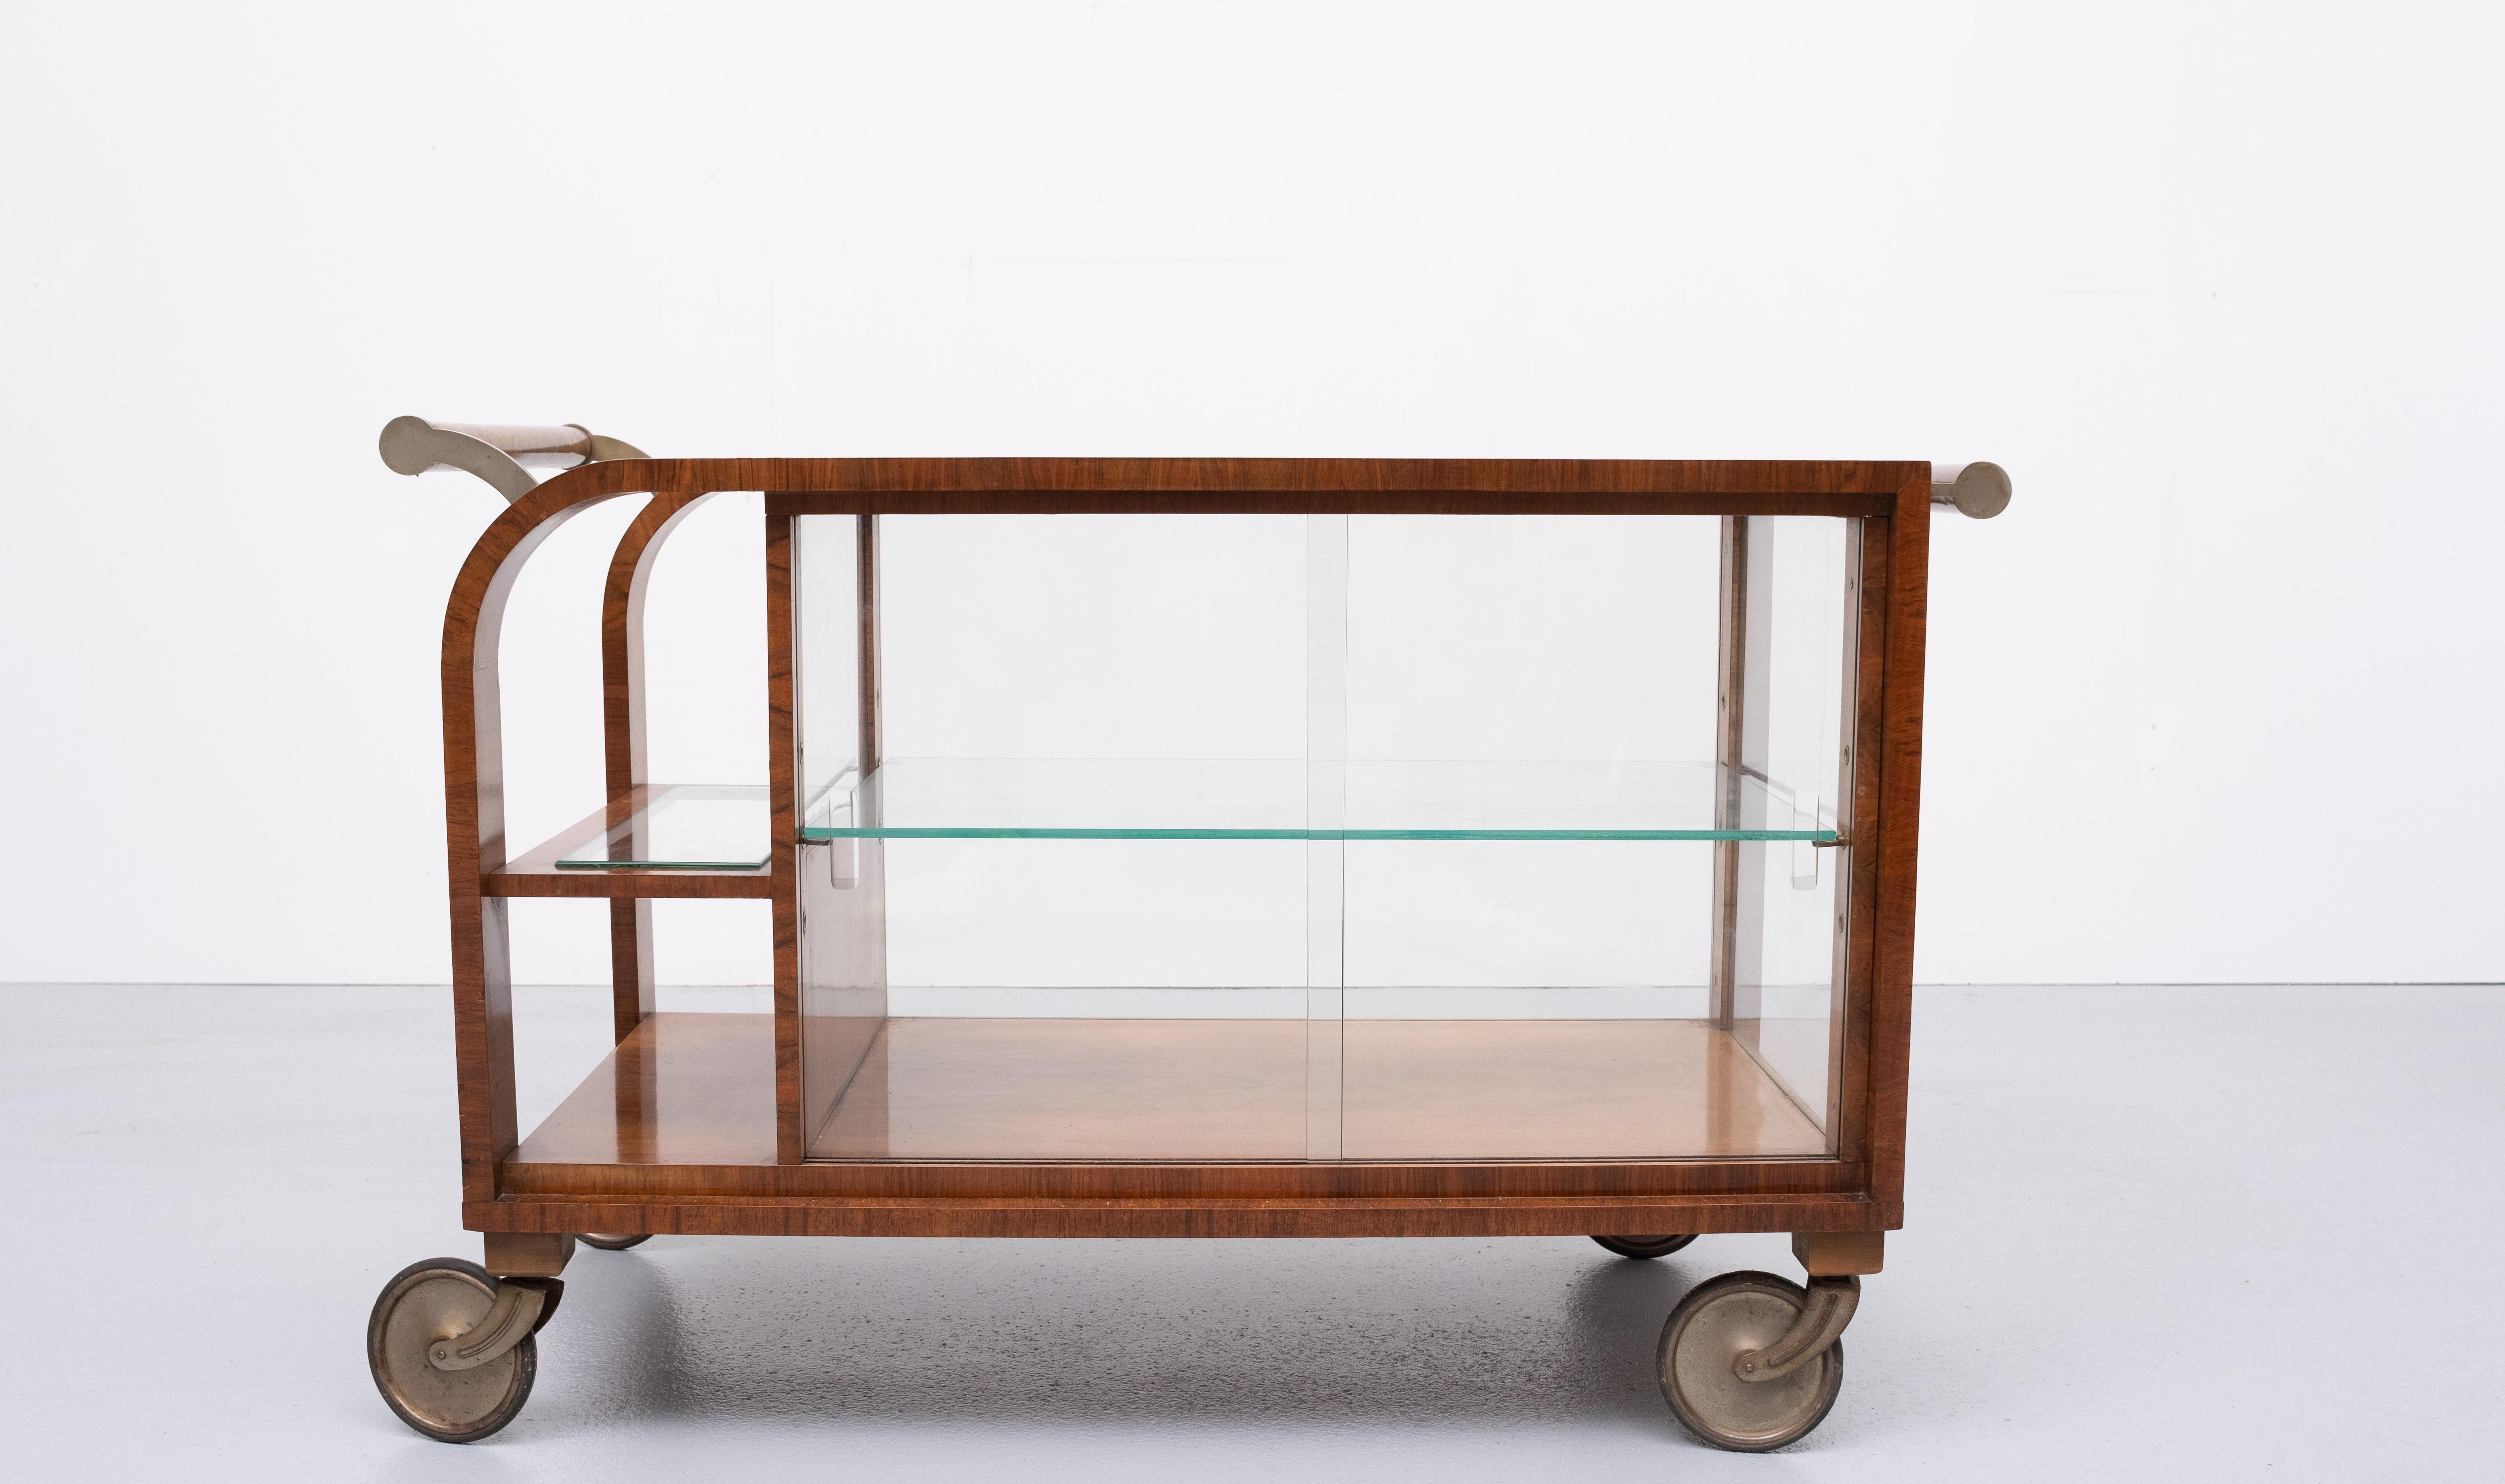 Superb curved Art Deco bar card or bakery table. Burl wood, comes on nickel wheels. The round carrot nuts handle bars are mounted in hand made Nickel holders comes complete with all the glass ware.
Two sliding glass doors. Glass top and shelves